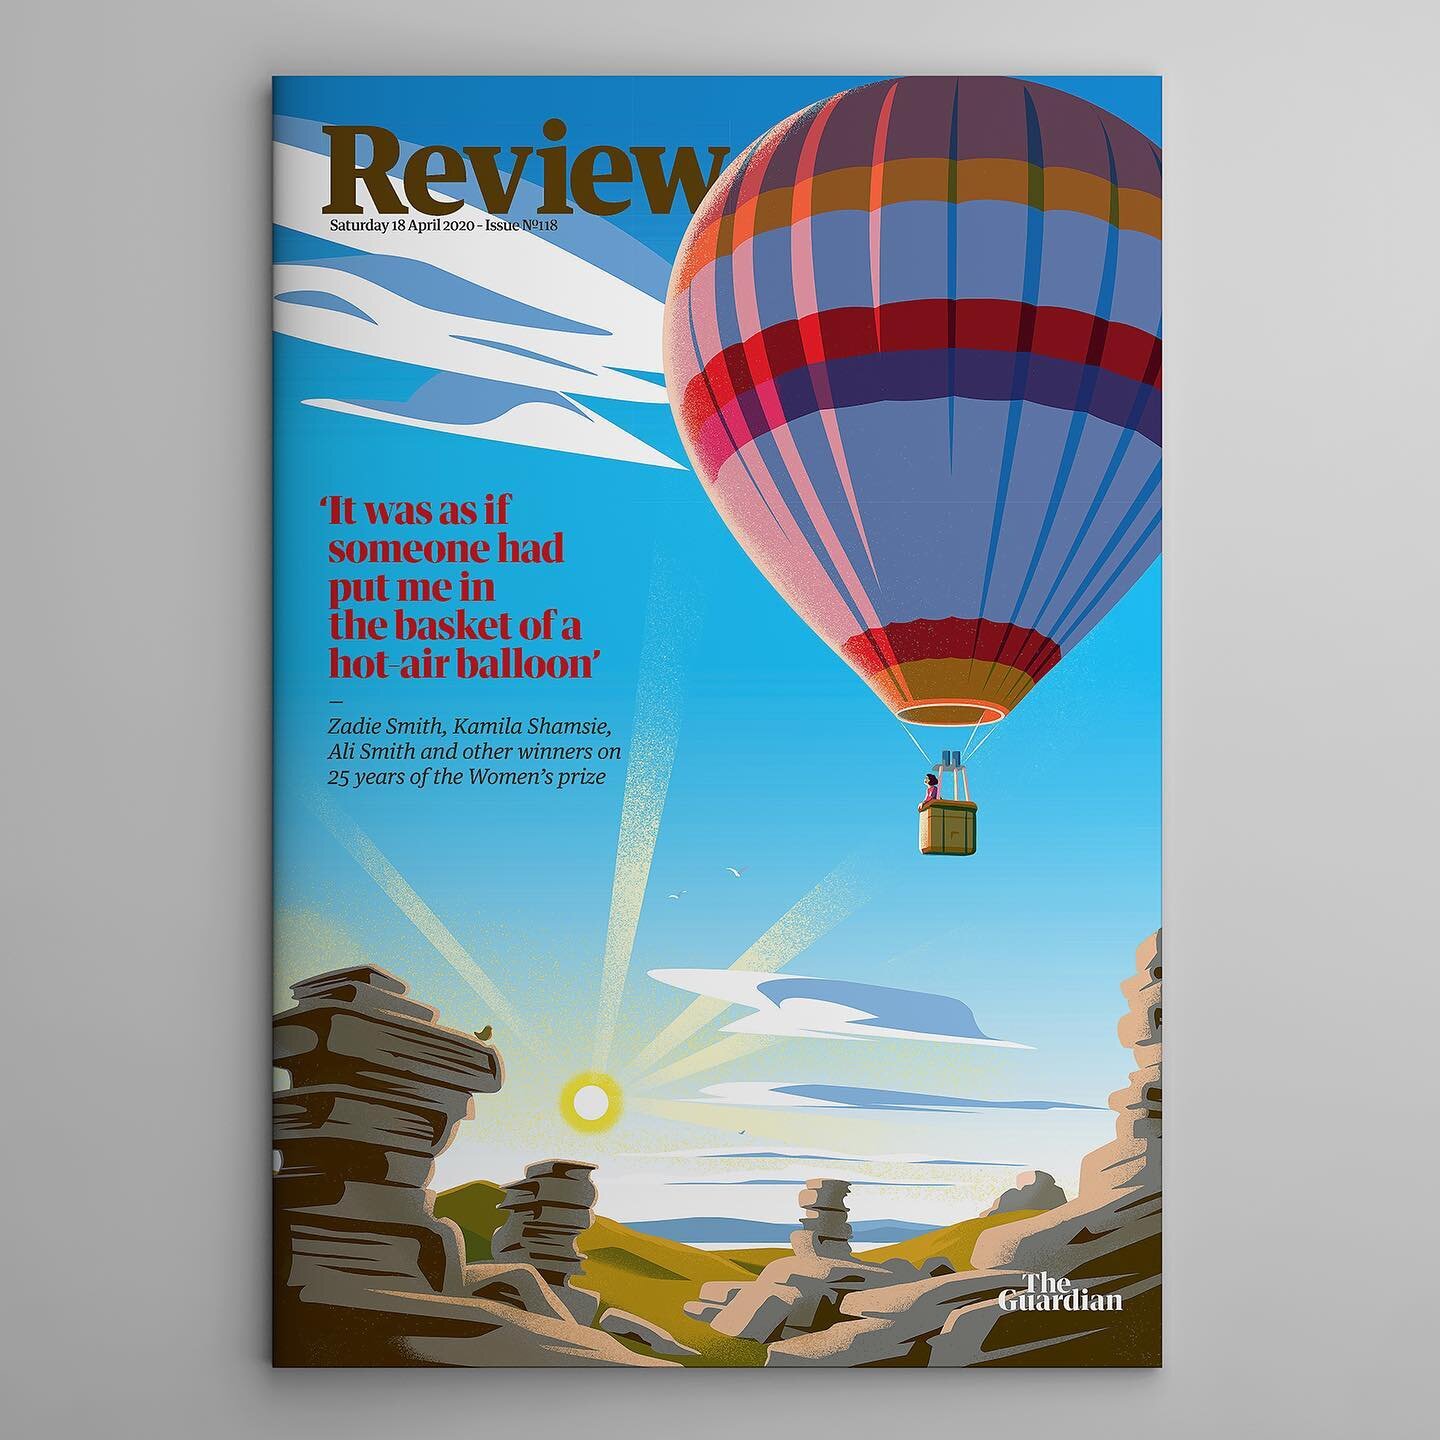 Another one of my @guardian Review illo from a couple of weekends back 🎈 AD @brunohaward @toppz1000 
#hotairballoon #balloonride #dartmoortors #morning #sunrise #books #womensprize #zadiesmith #kamilashamsie #bookreview #dawn #reading #literature #i